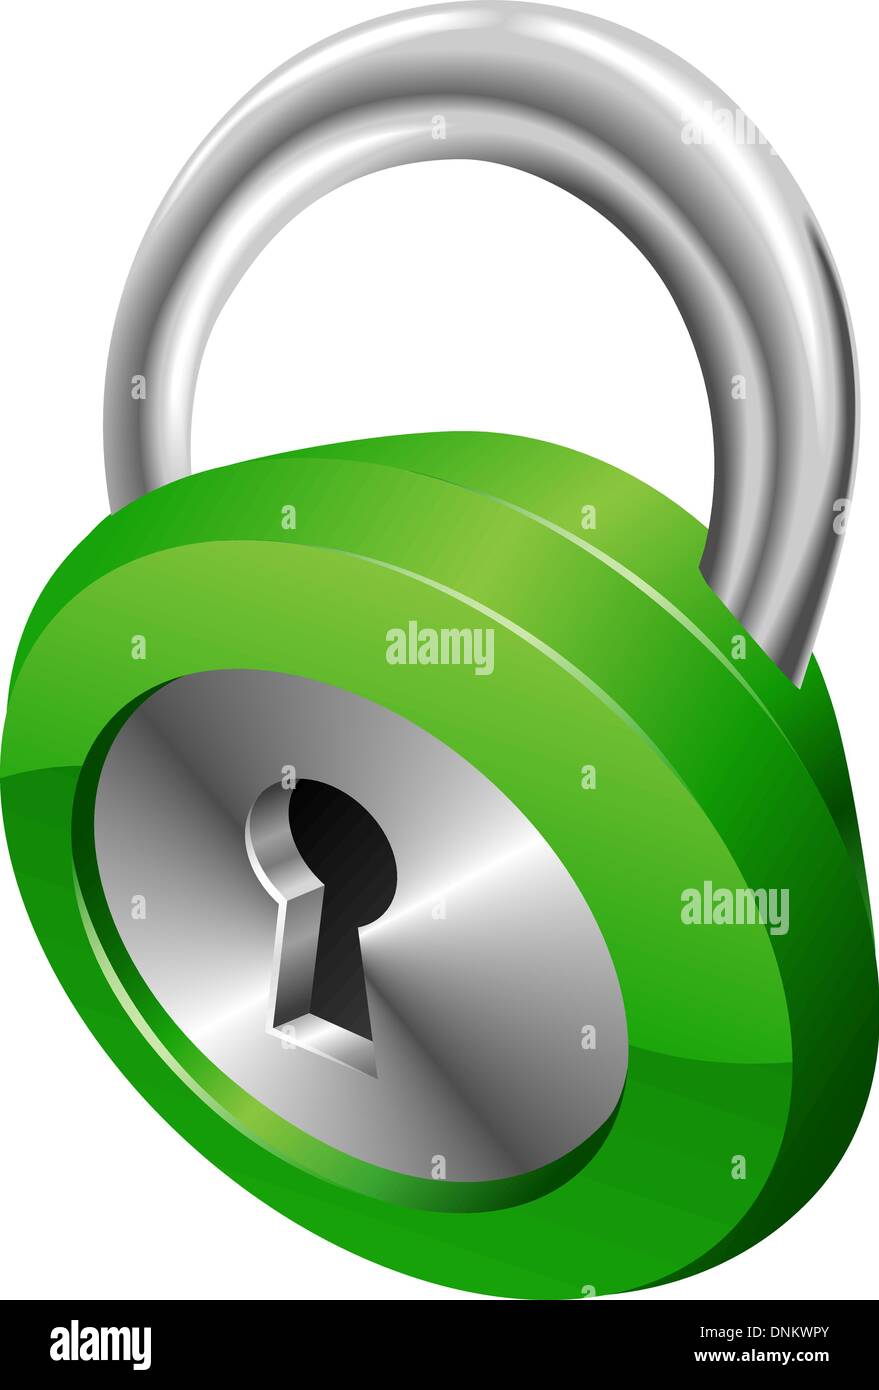 A shiny silver and green steel metallic security padlock vector illustration with dynamic perspective. Can be used as an icon or Stock Vector